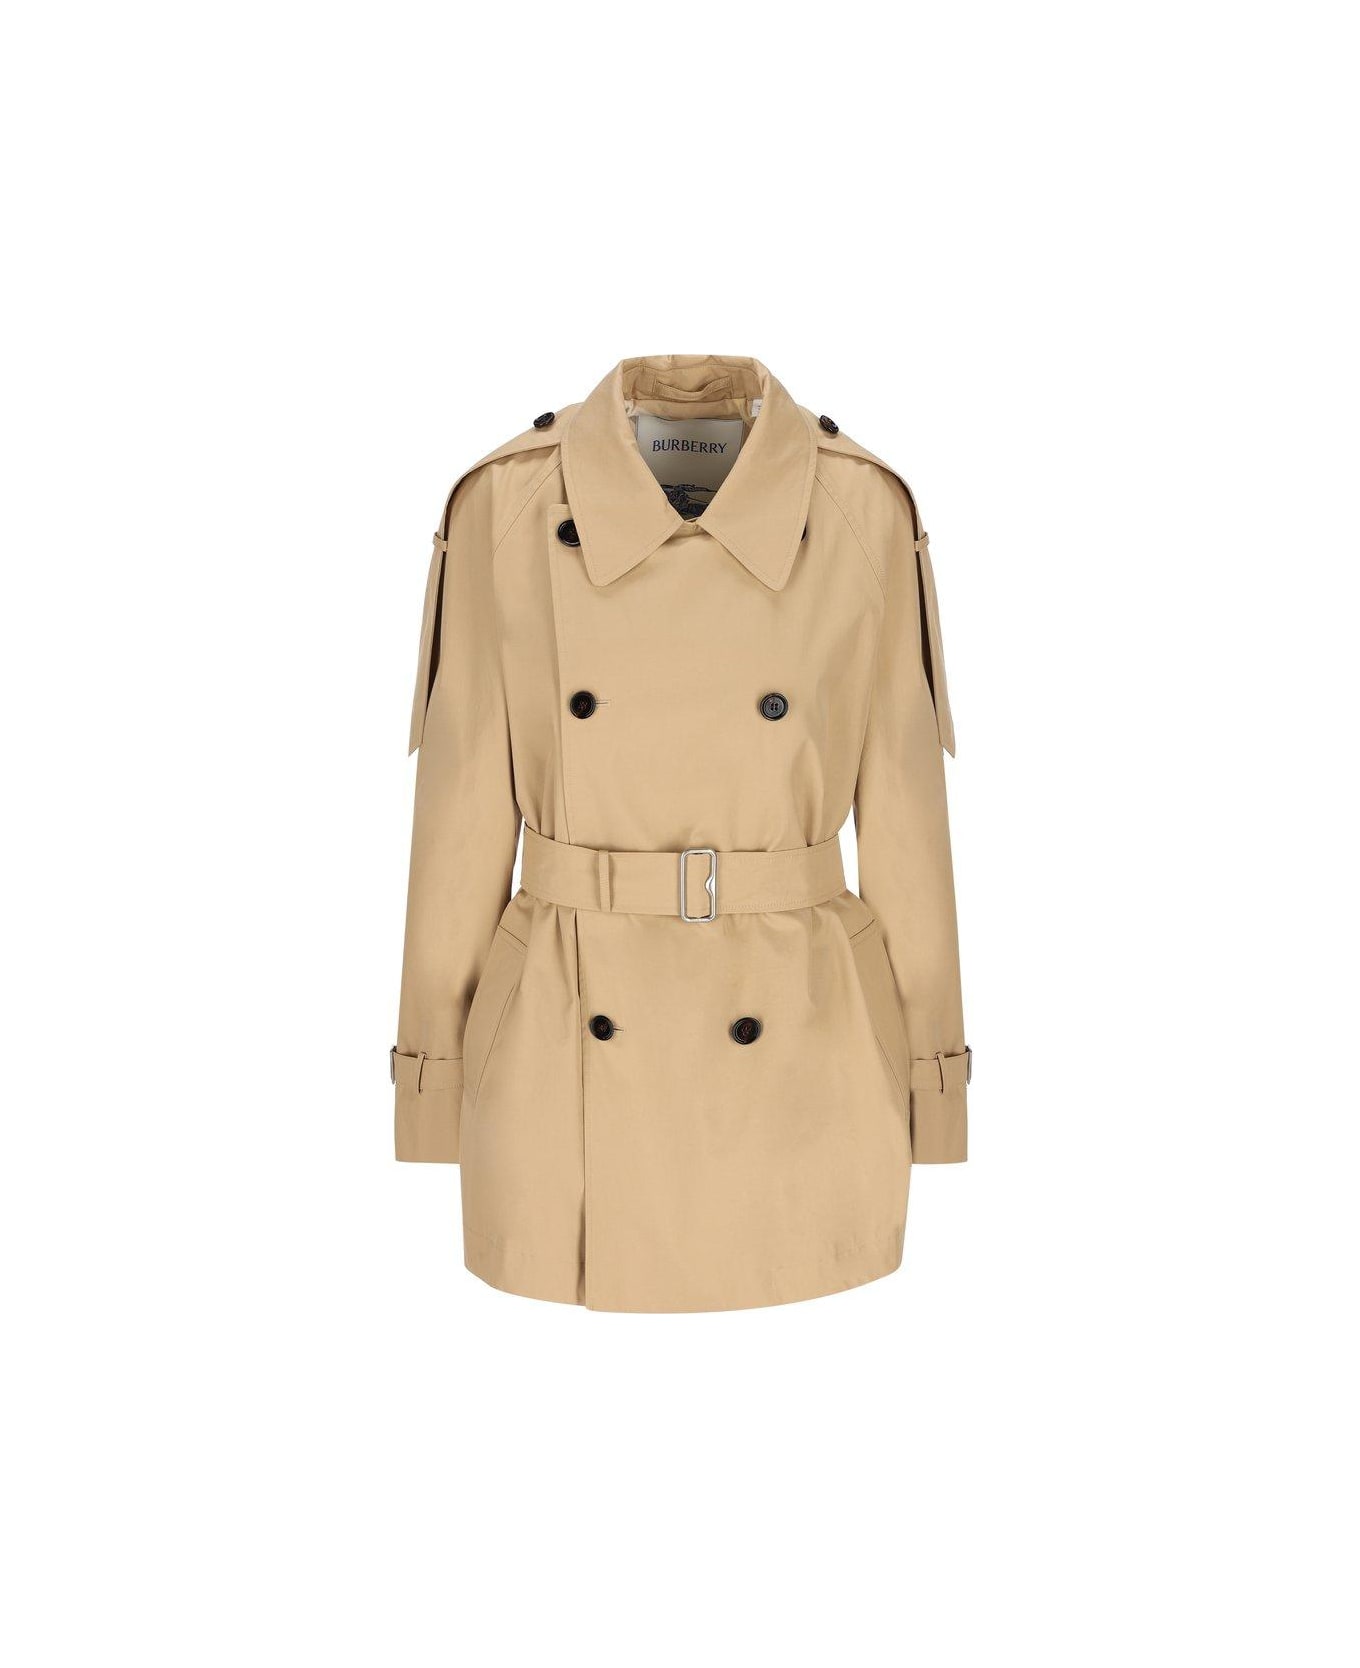 Burberry Double Breasted Belted Trench Coat - Flax レインコート